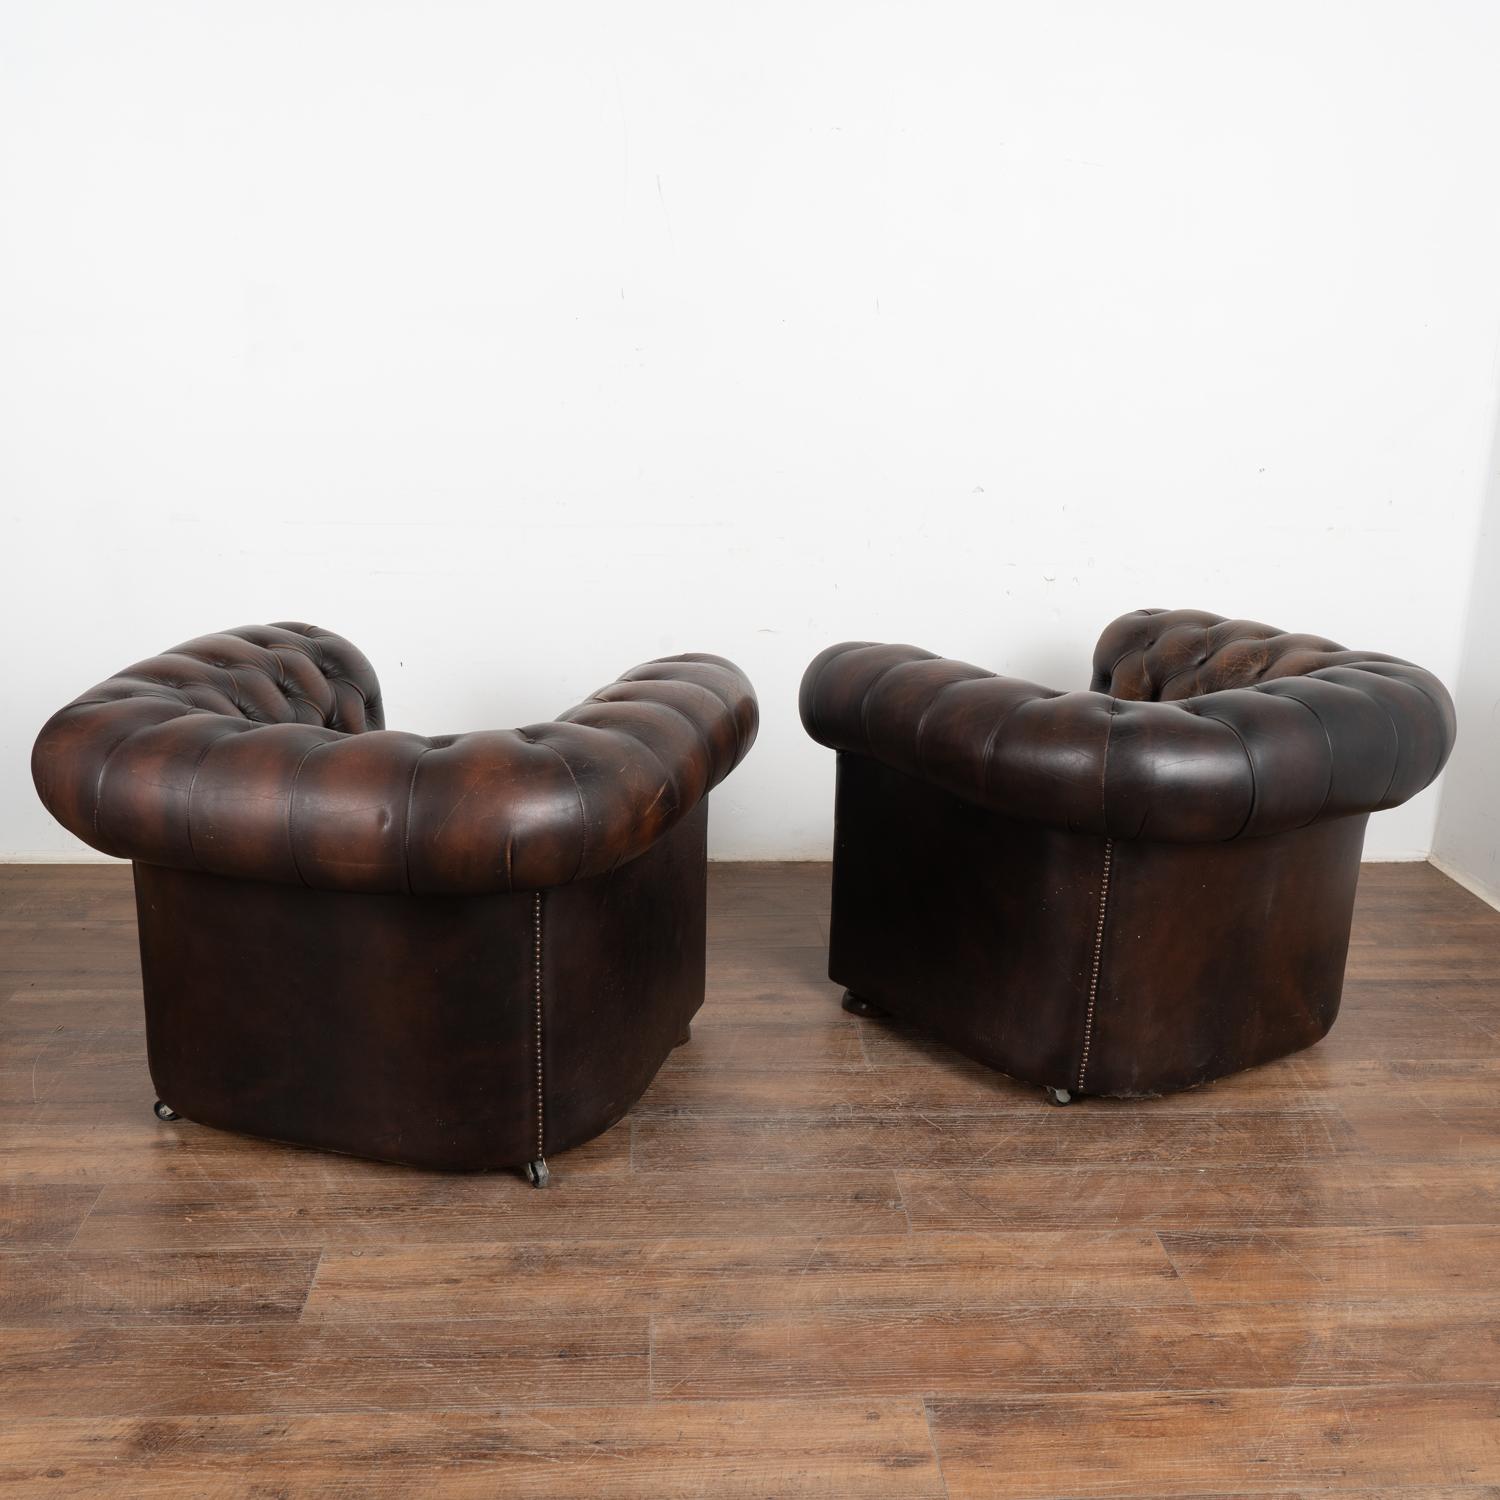 Pair, Chesterfield Brown Leather Armchair Club Chairs, Denmark circa 1940-60 For Sale 8